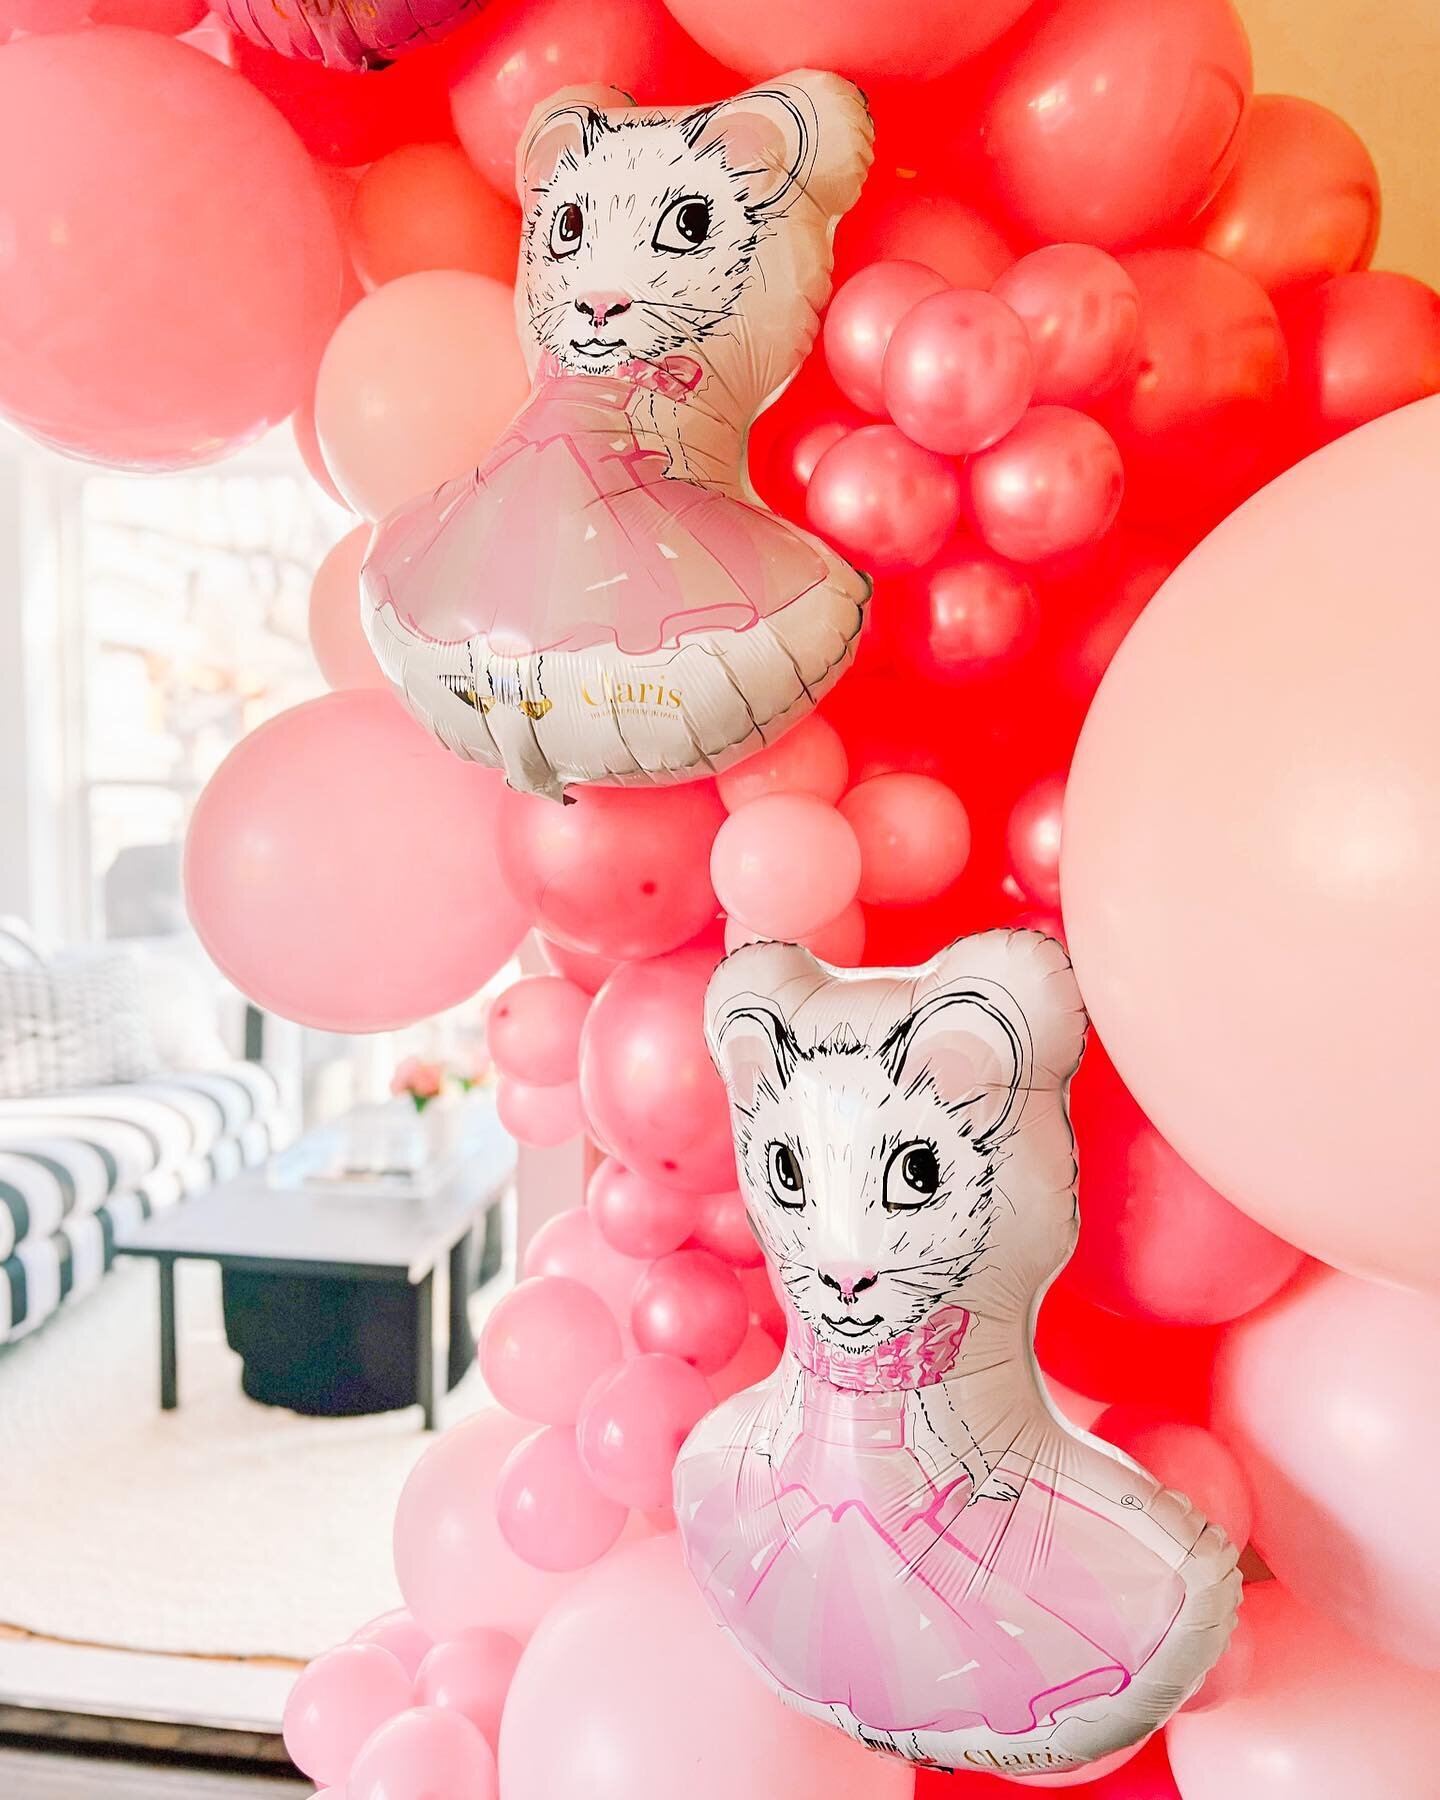 We haven&rsquo;t been the best at keeping up with social media posts lately&hellip;but we plan on changing that in the new year! We also couldn&rsquo;t help but share this ADORABLE &ldquo;Claris: The Chicest Mouse in Paris&rdquo; birthday party! 🎀